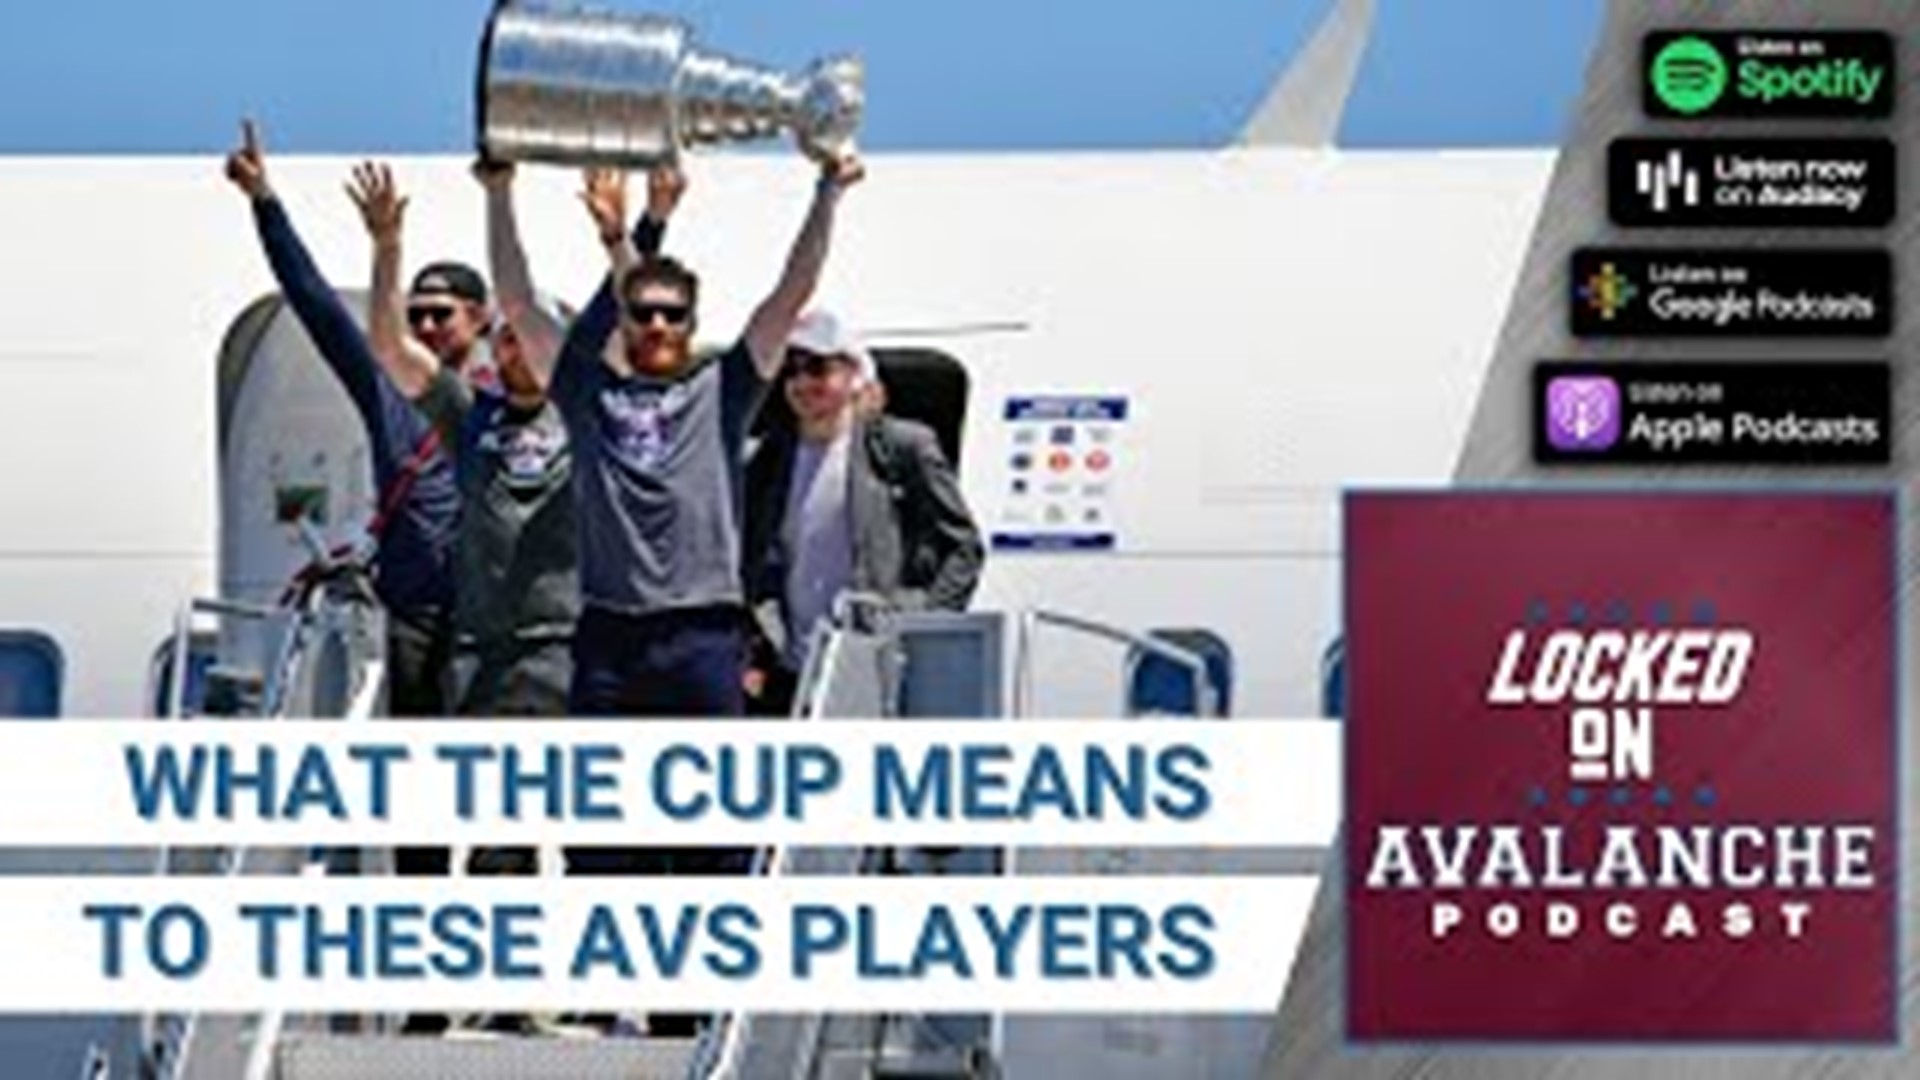 The images coming out of the Cup's journey from Tampa and Denver has been exciting to see, and it's just getting started as we wait for the victory parade Thursday.